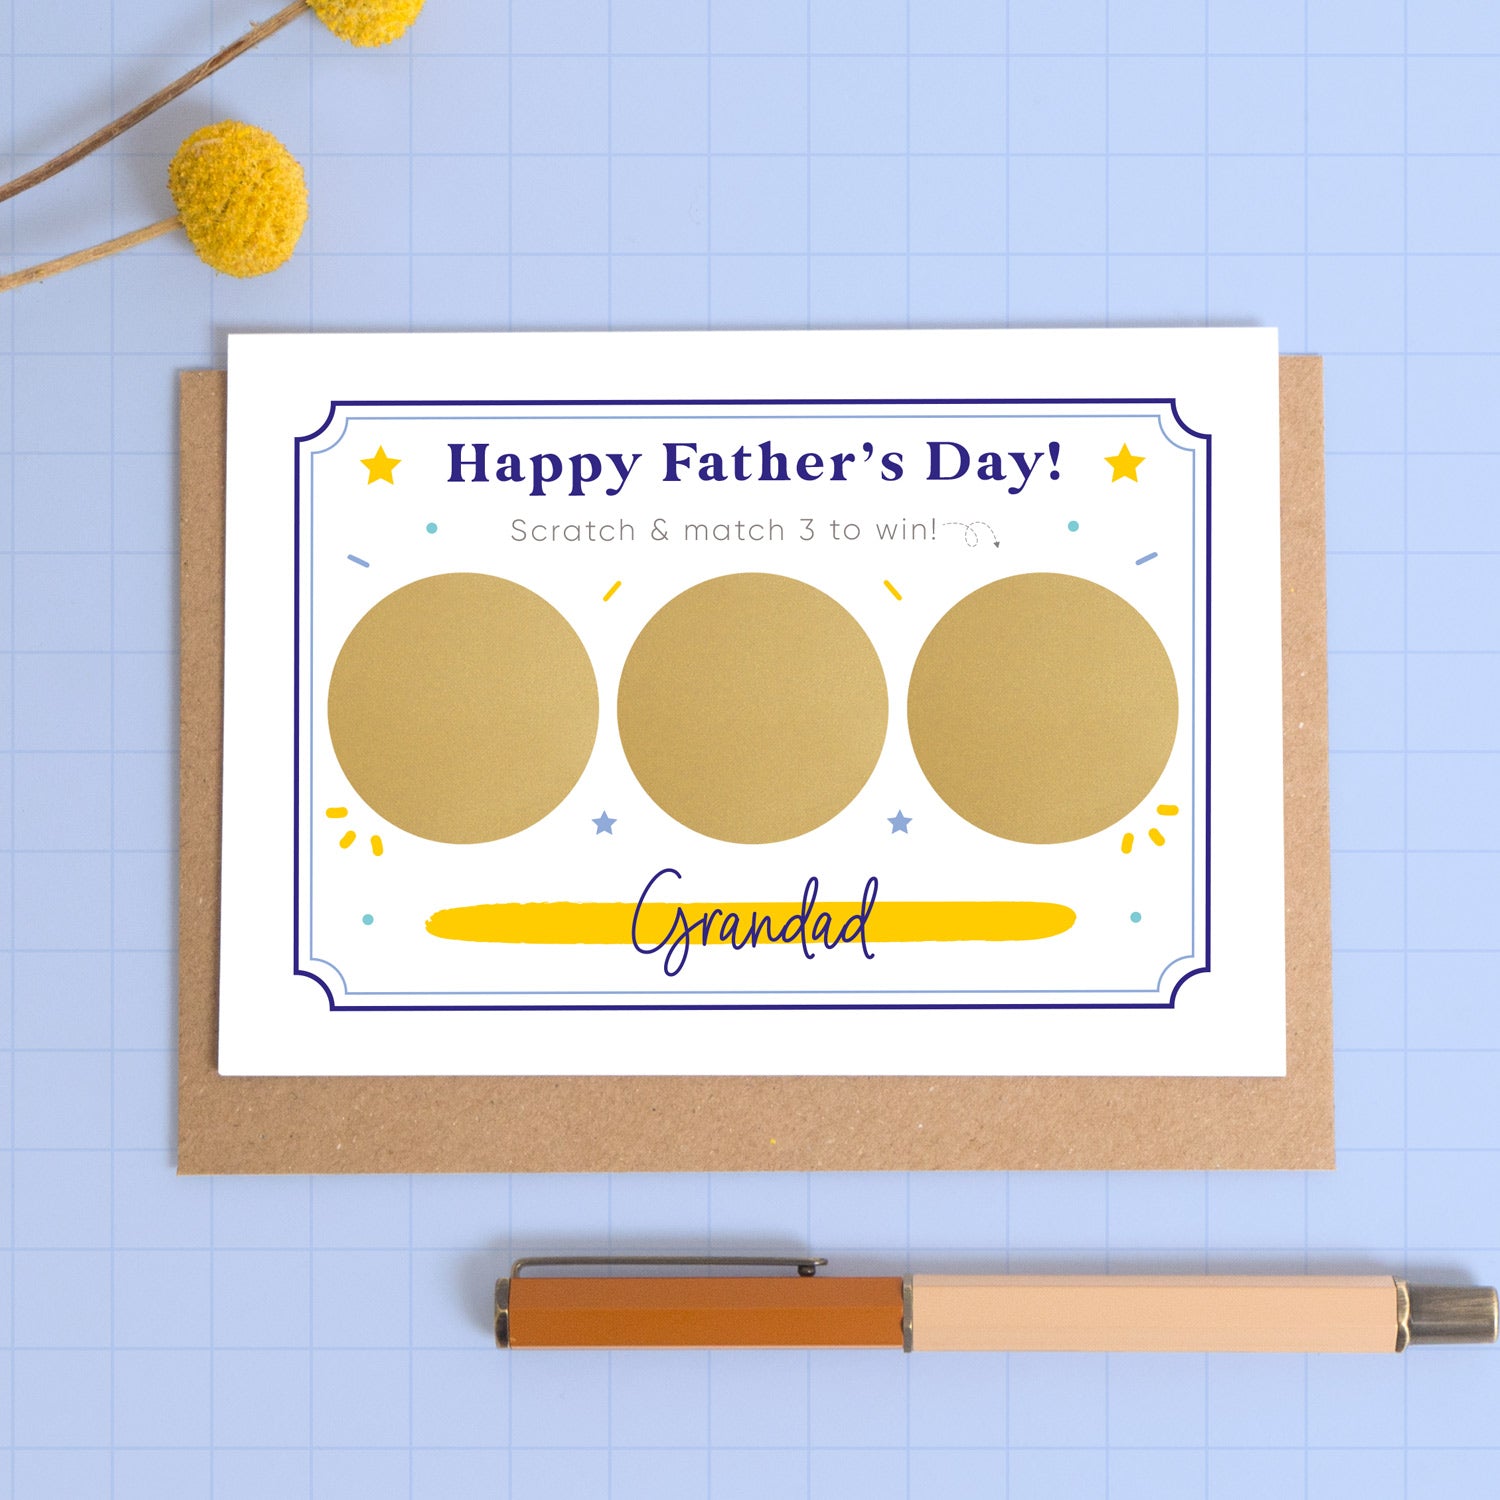 A personalised Father’s day scratch three to win style scratch card photographed on a blue background with a pop of yellow flowers and a pen for scale. This image shows the blue version of the card with the golden circles not yet scratched off.